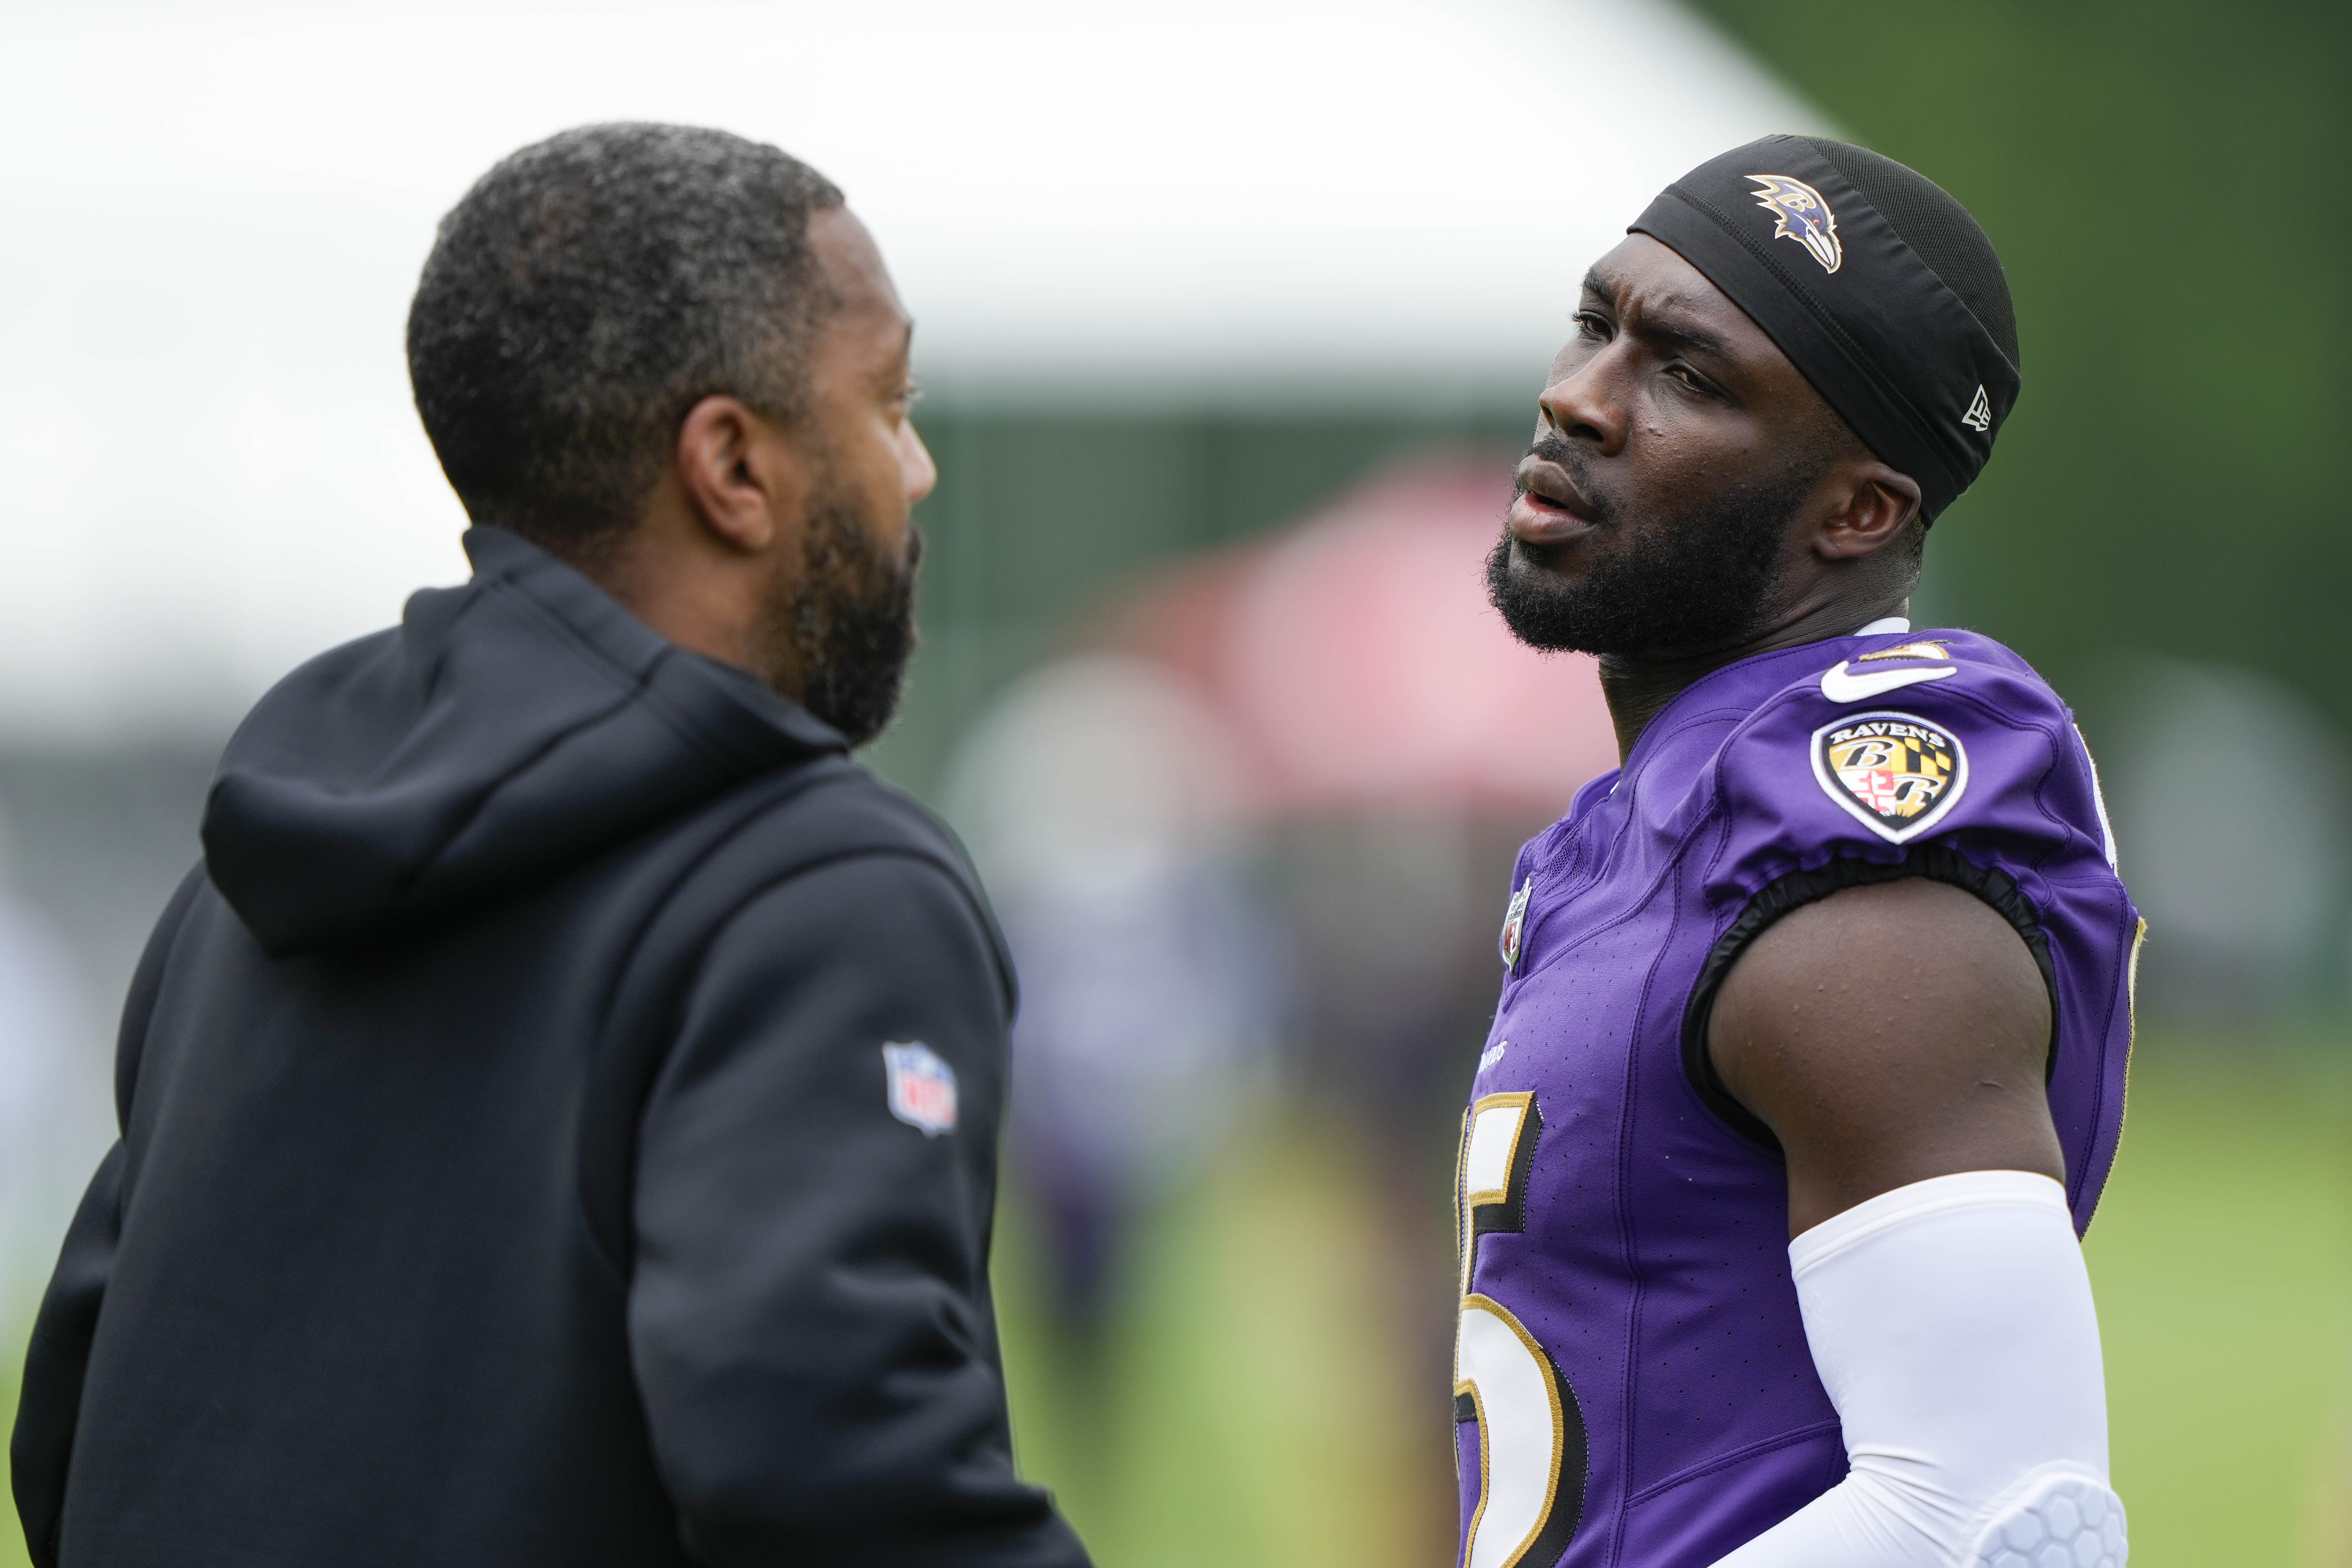 Ravens wide receivers coach Greg Lewis will interview for the Saints OC job